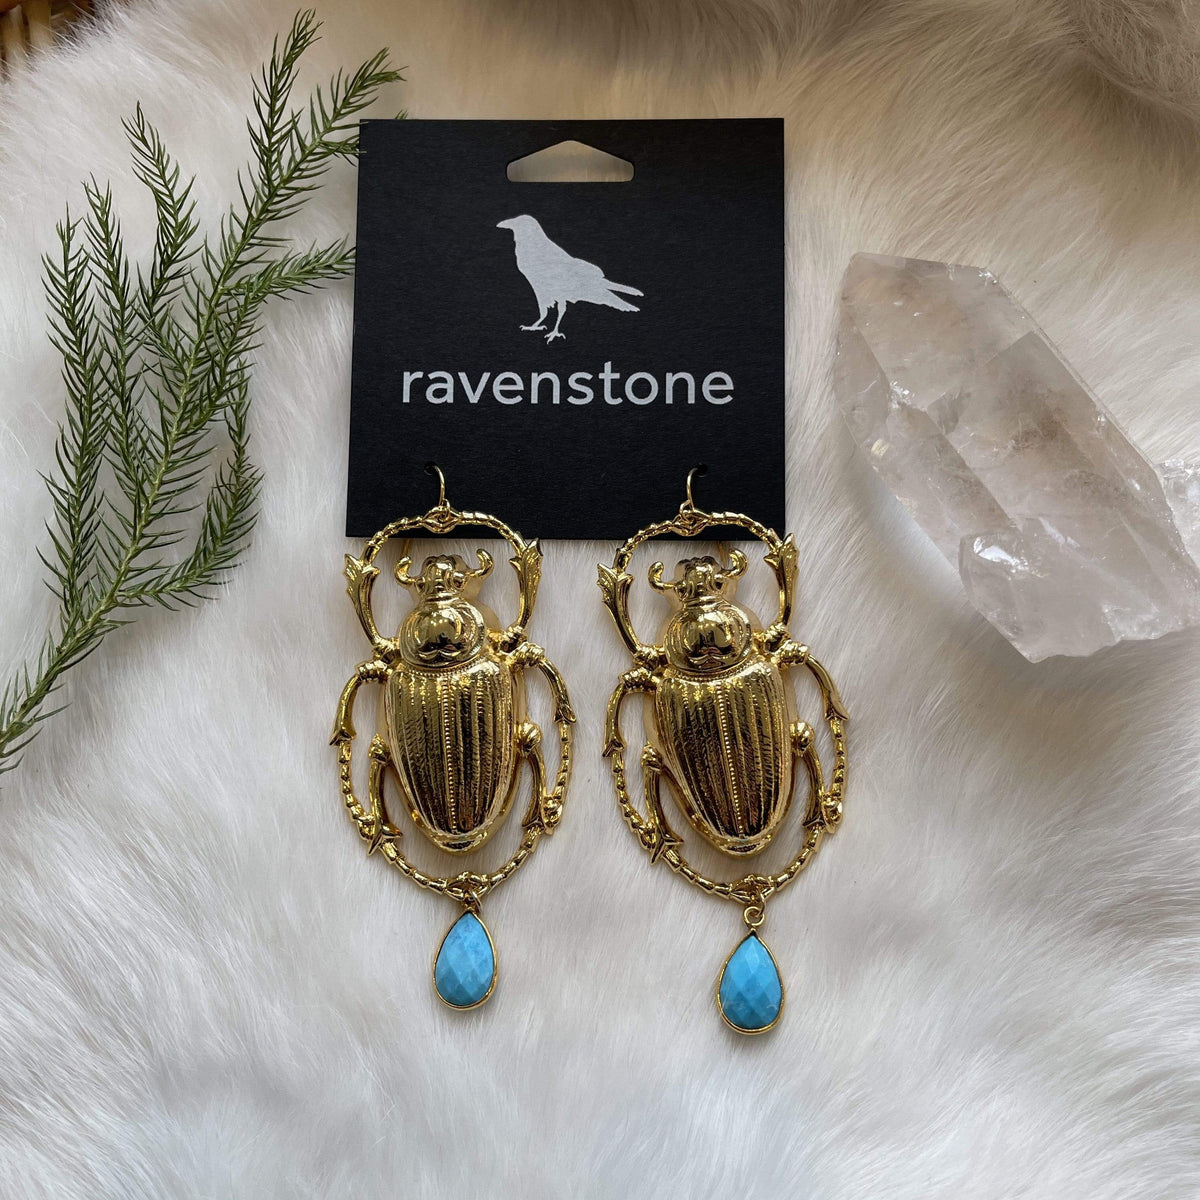 Ravenstone The Big Golden Scarab and Turquoise Earrings